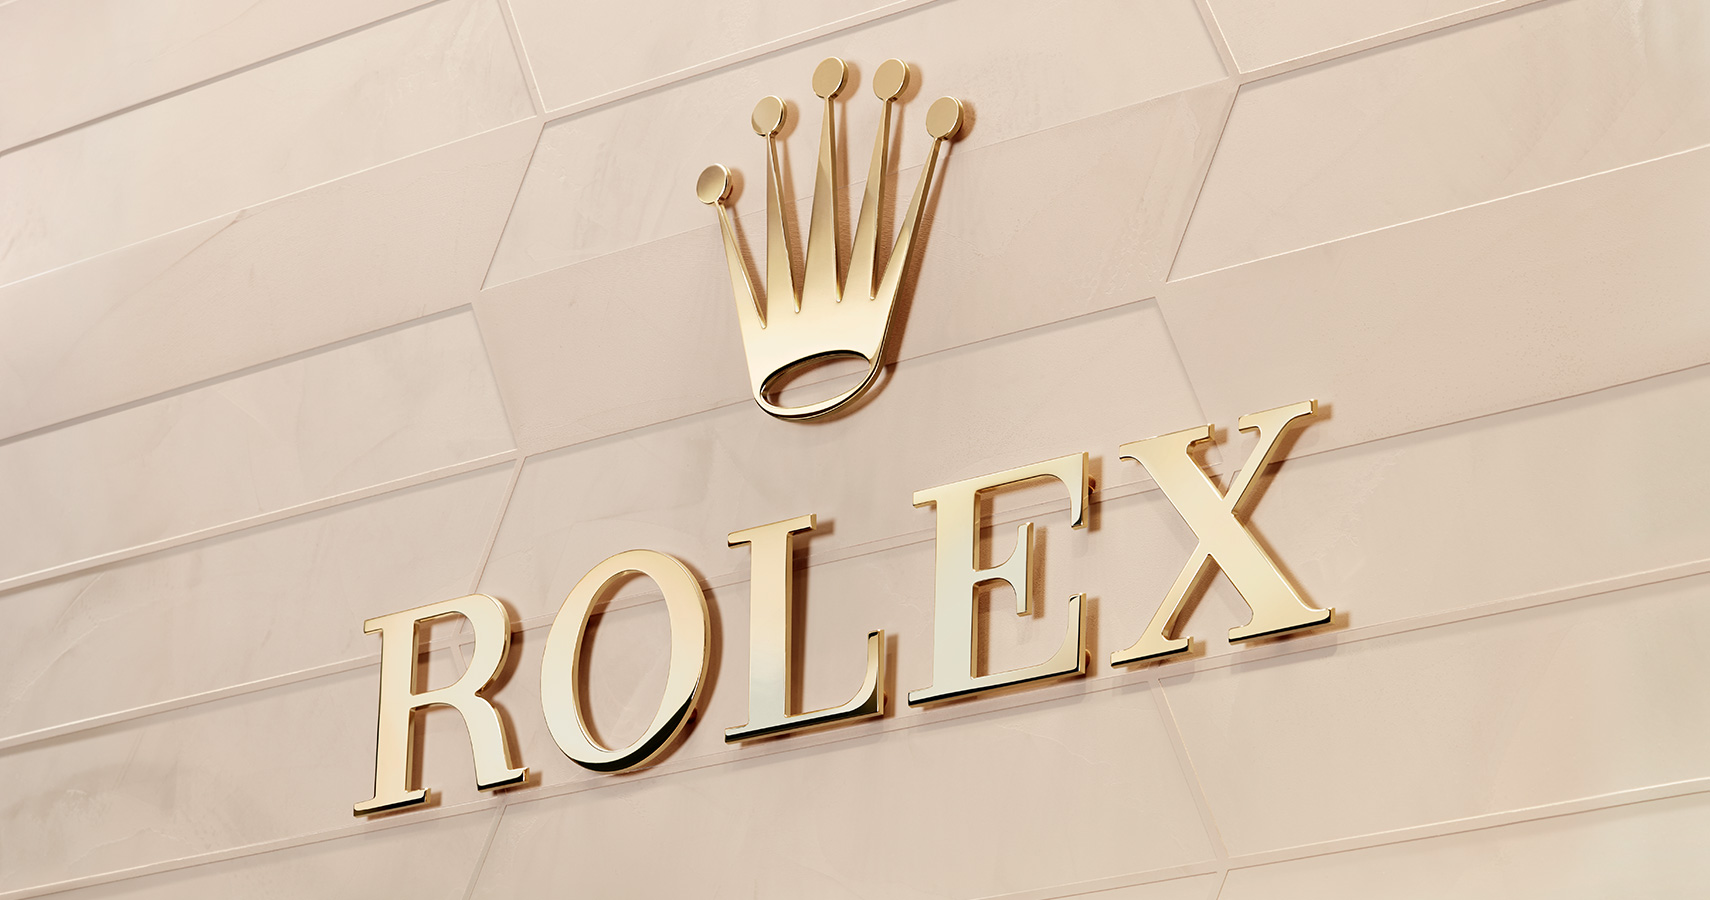 Discover the latest Rolex watches at La Mine dOr, an Official Rolex Retailer.